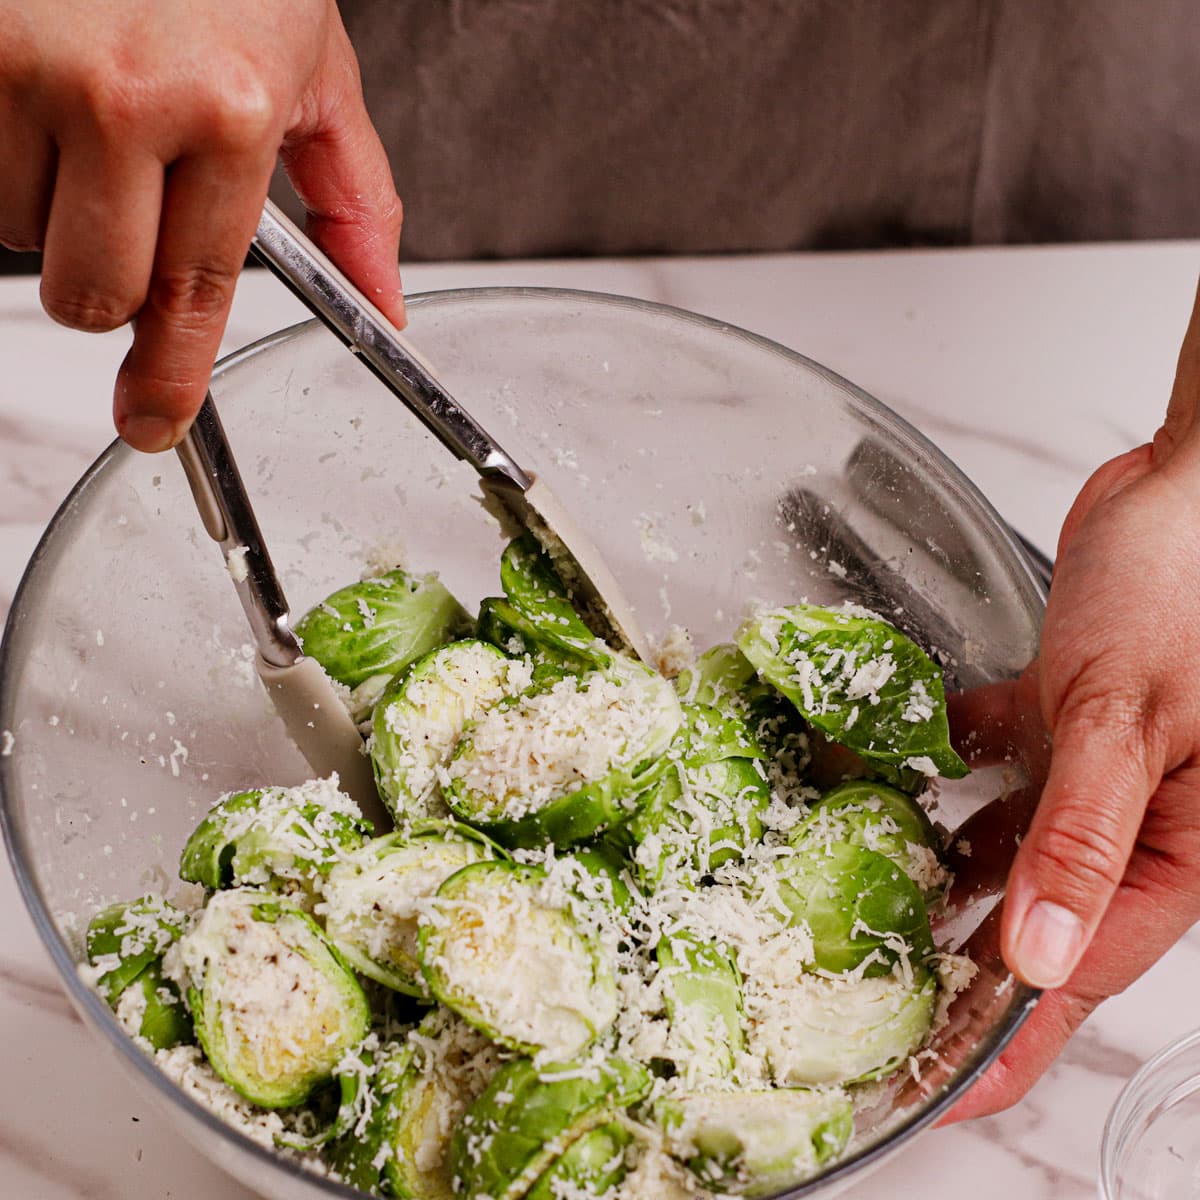 Seasoning Brussels sprouts with olive oil, salt, pepper, and lots of grated parmesan cheese.